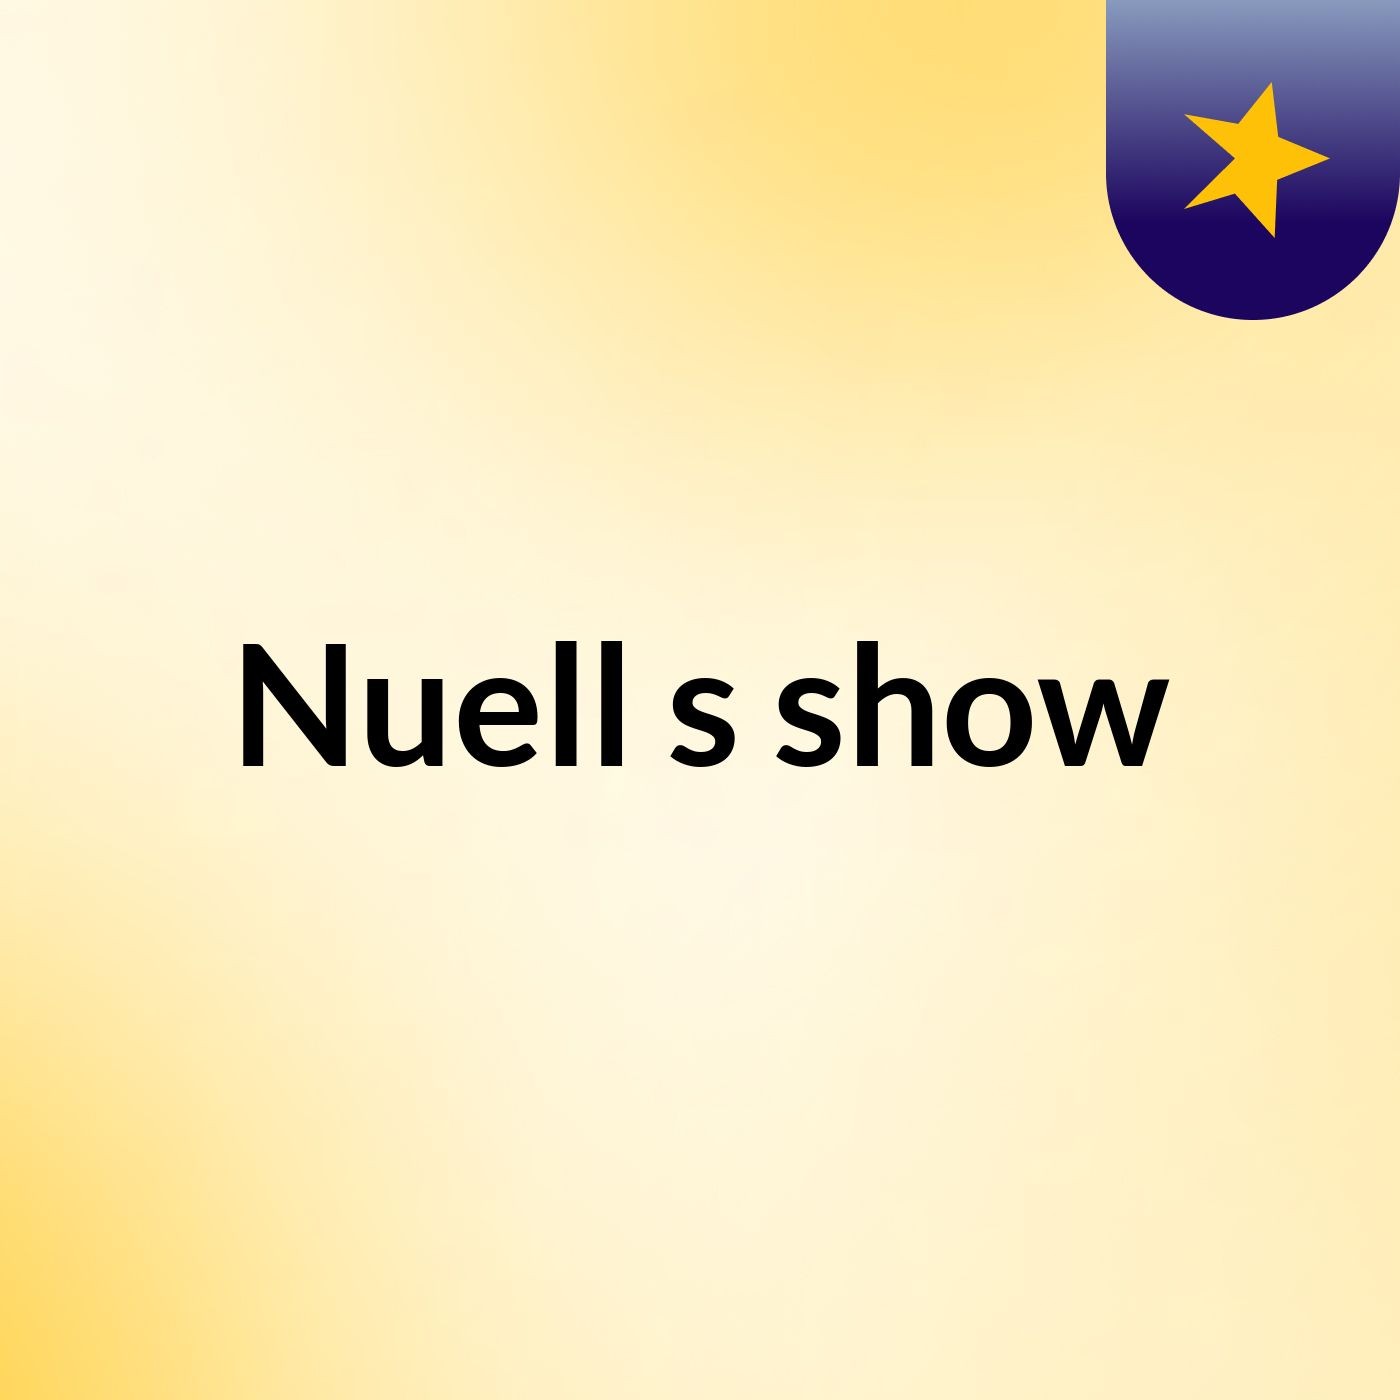 Nuell's show